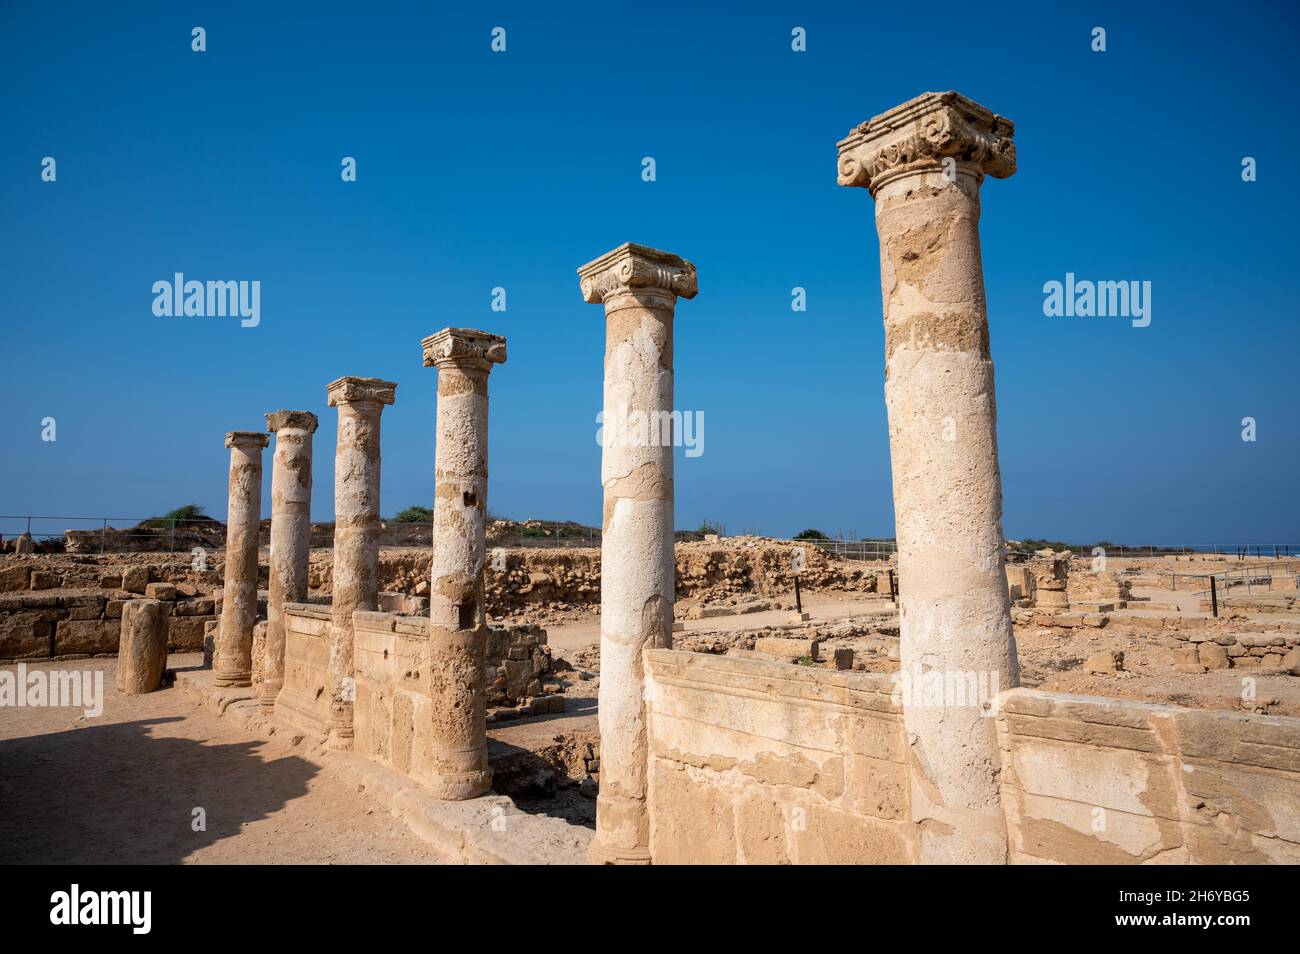 Columns and structures are part of the ancient romans ruins in Nea Paphos Archaeological Park - Cyprus Stock Photo